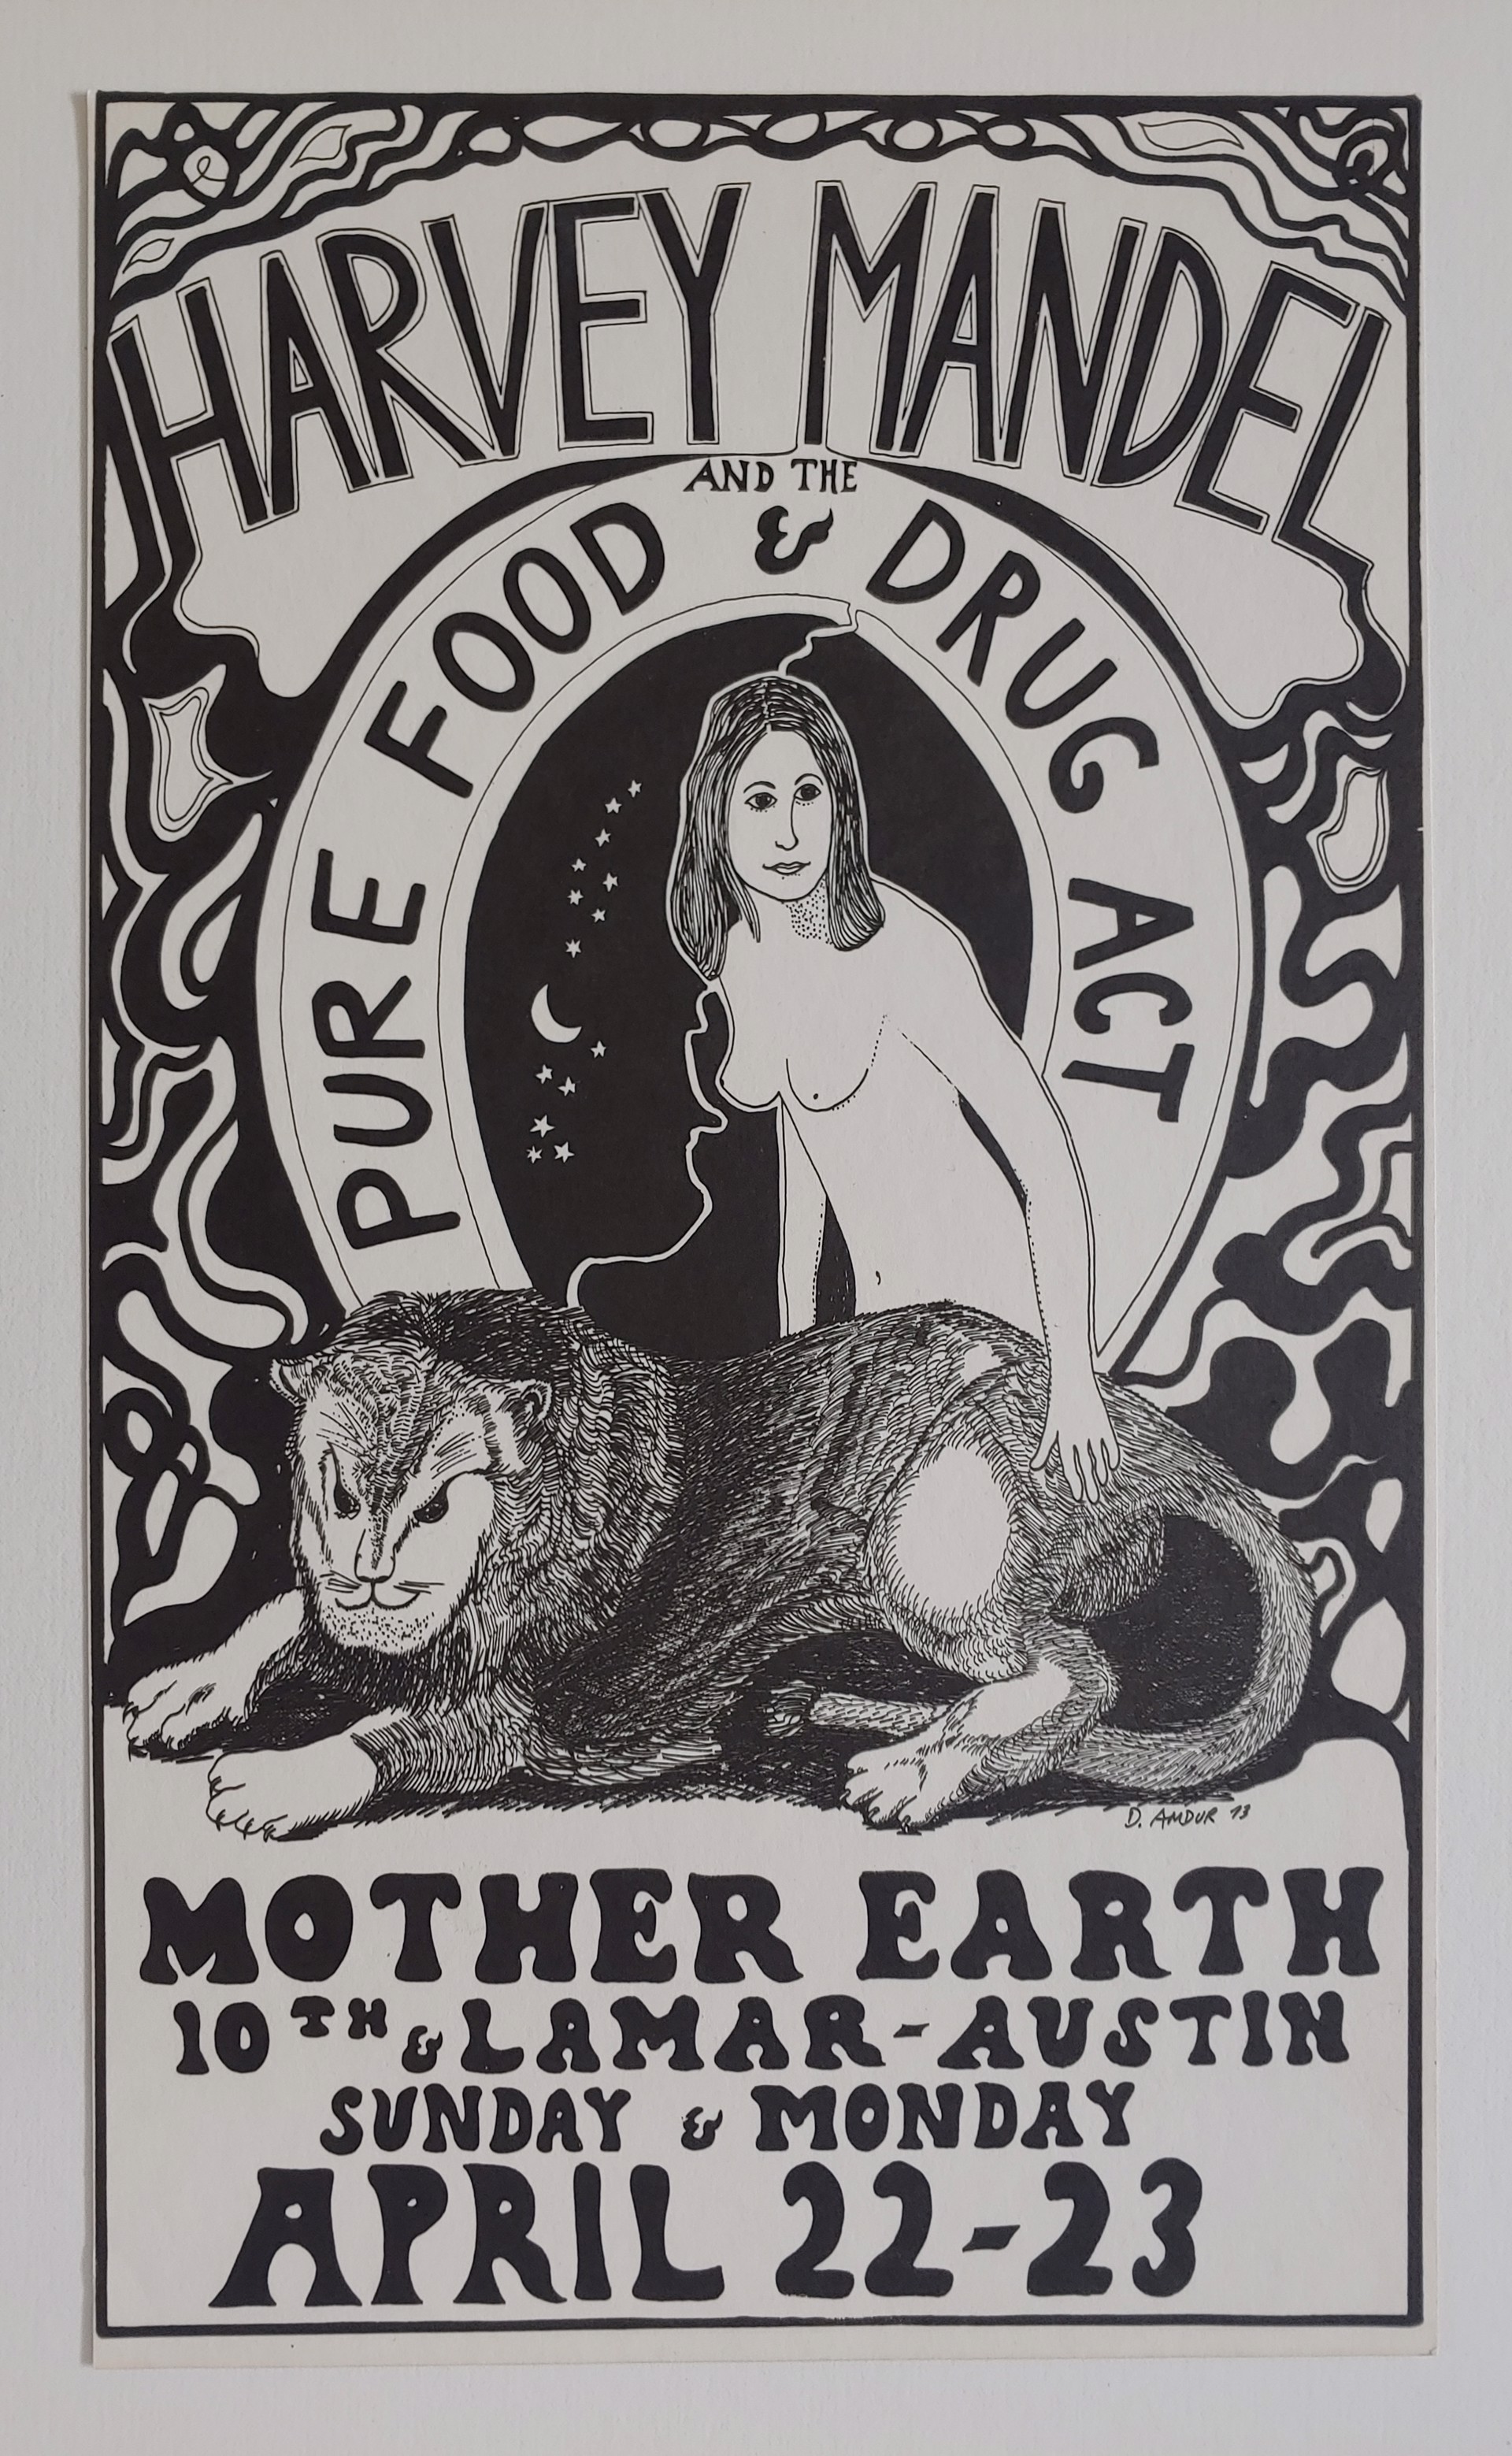 Harvey Mandel and the Pure Food & Drug Act Poster by David Amdur